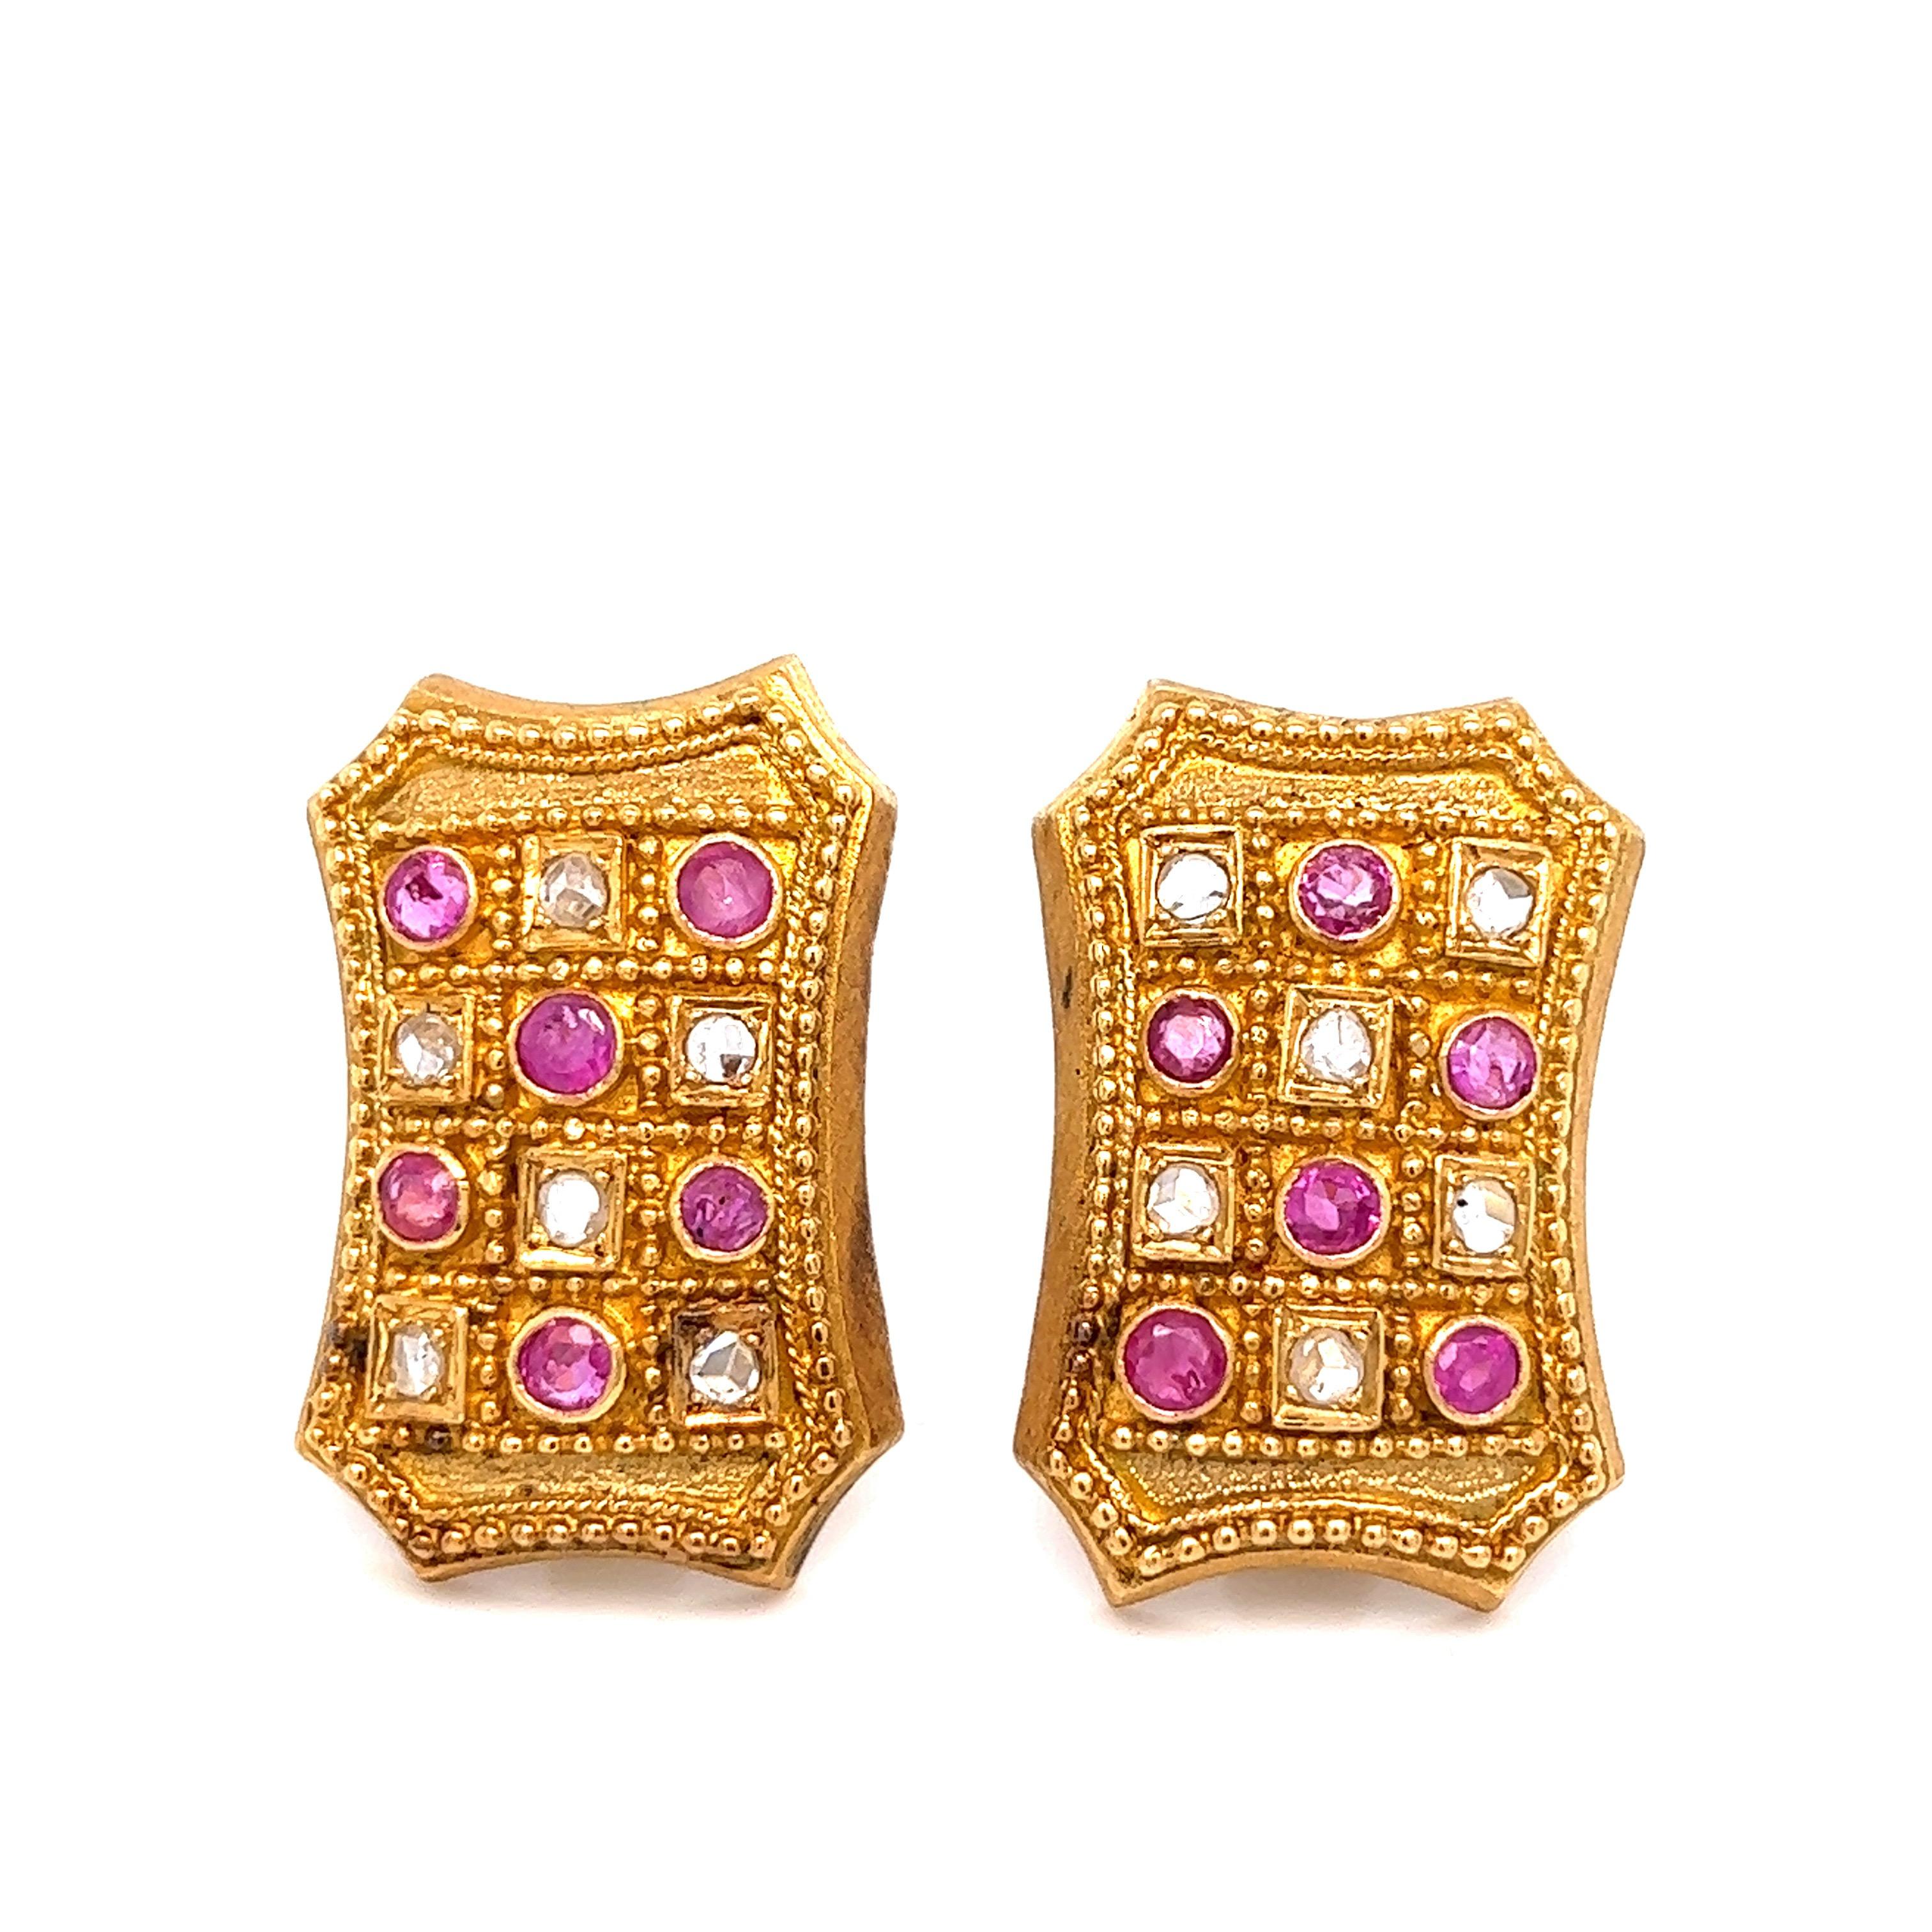 Lalaounis Ruby Diamond Gold Ear Clips In Excellent Condition For Sale In New York, NY